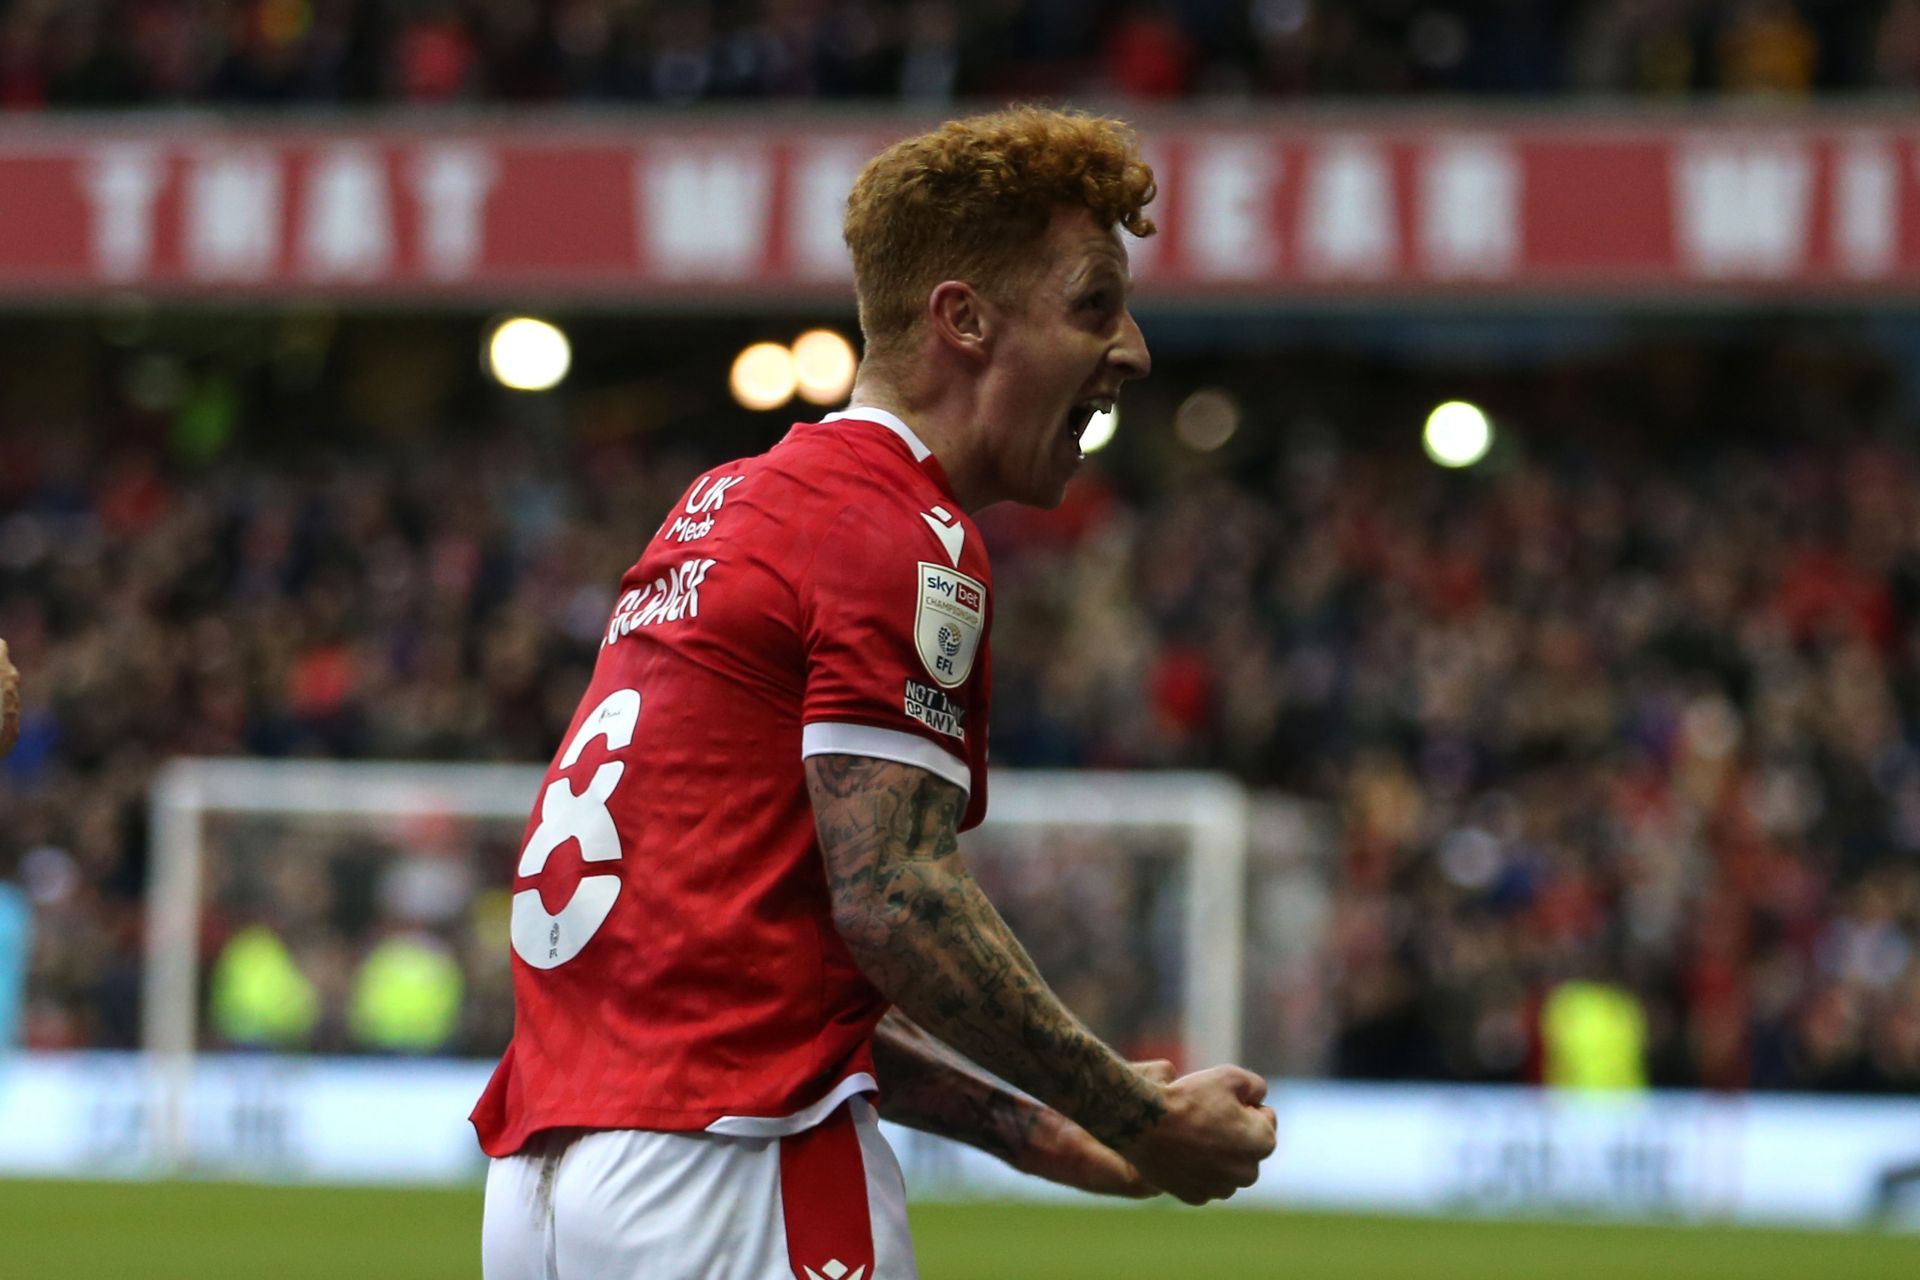 Colback will be a huge miss for Nottingham Forest